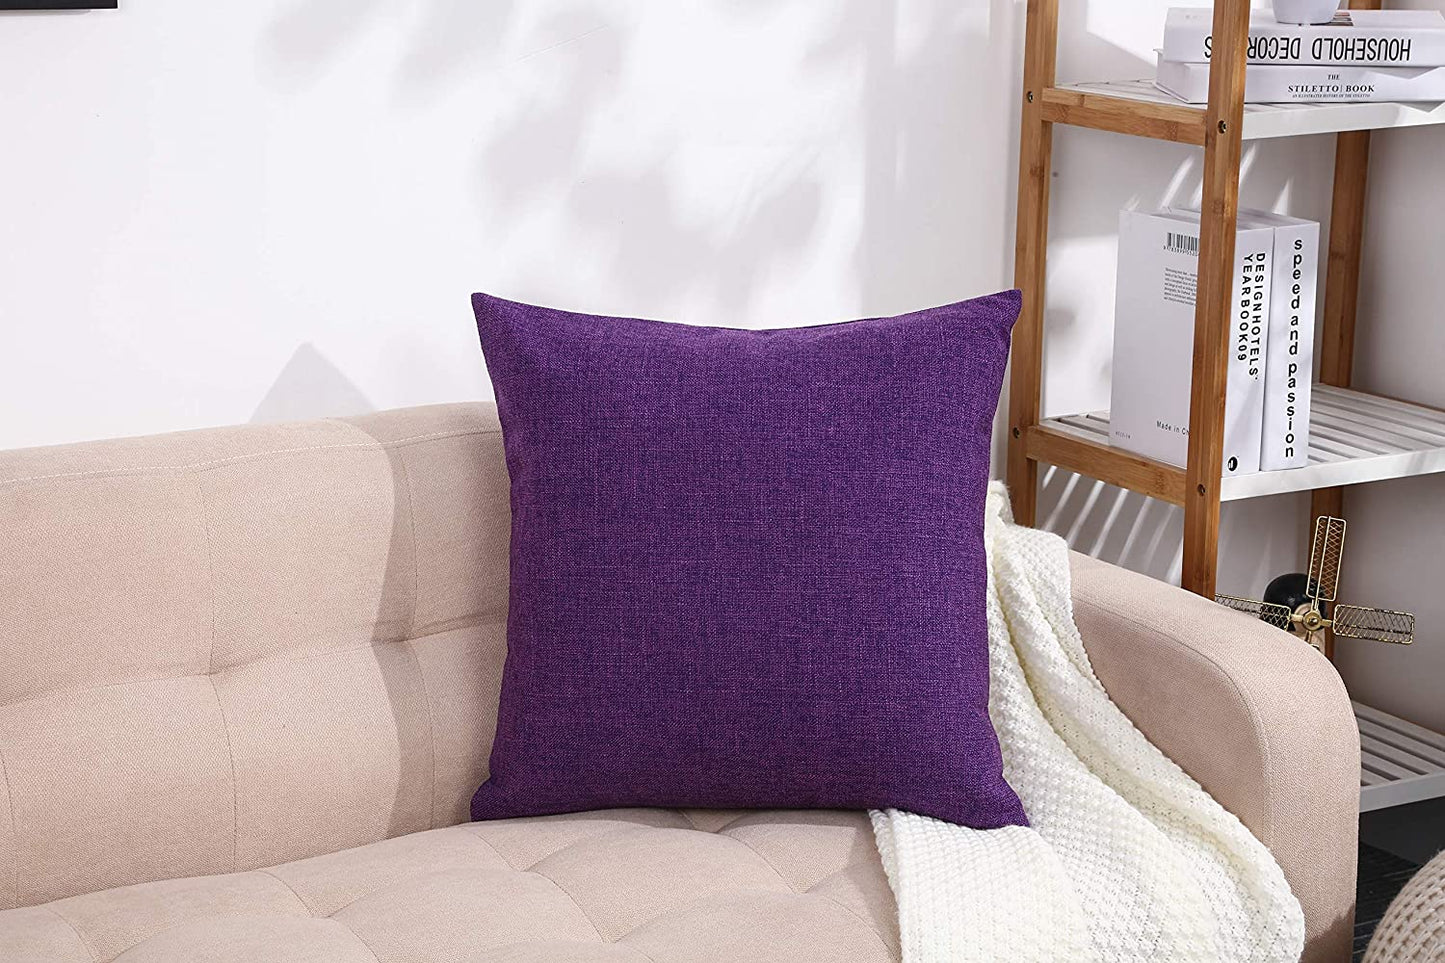 "Magical Unicorn Hideout Pillow Fortress - The Supreme 14"X14" Solid Purple Edition"